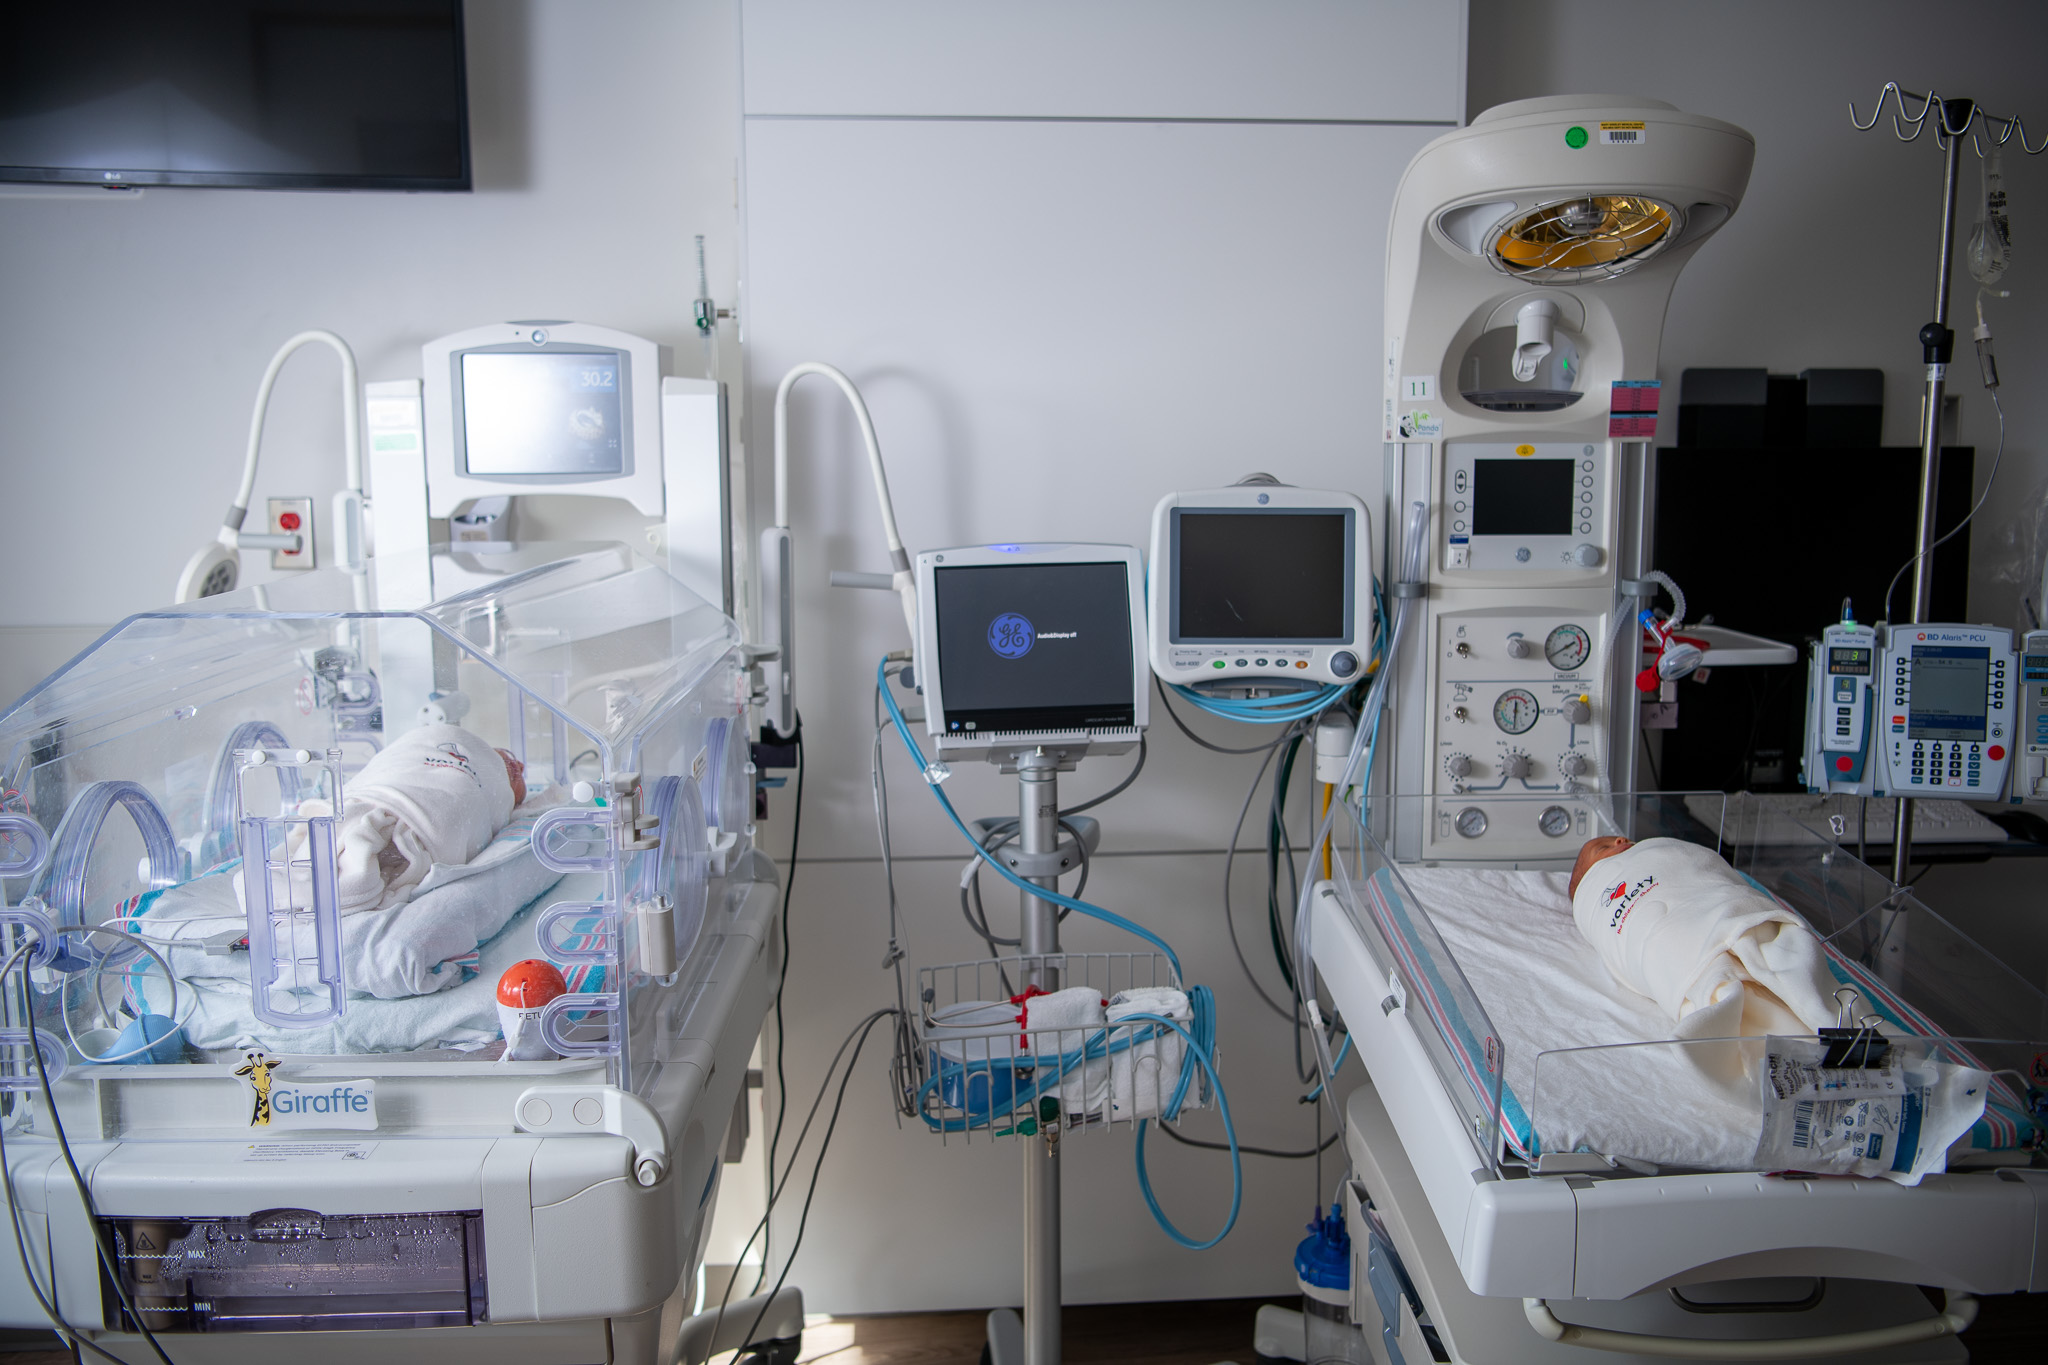 After being born seven weeks early, twins Daniel and Elinor, benefitted from the Giraffe Incubators (left) and Panda Warmers (right) at Mary Greeley Medical Center. The units provide a nurturing, life-sustaining environments that foster growth by offering a warm and comfortable space for infants in need of neonatal intensive care services.